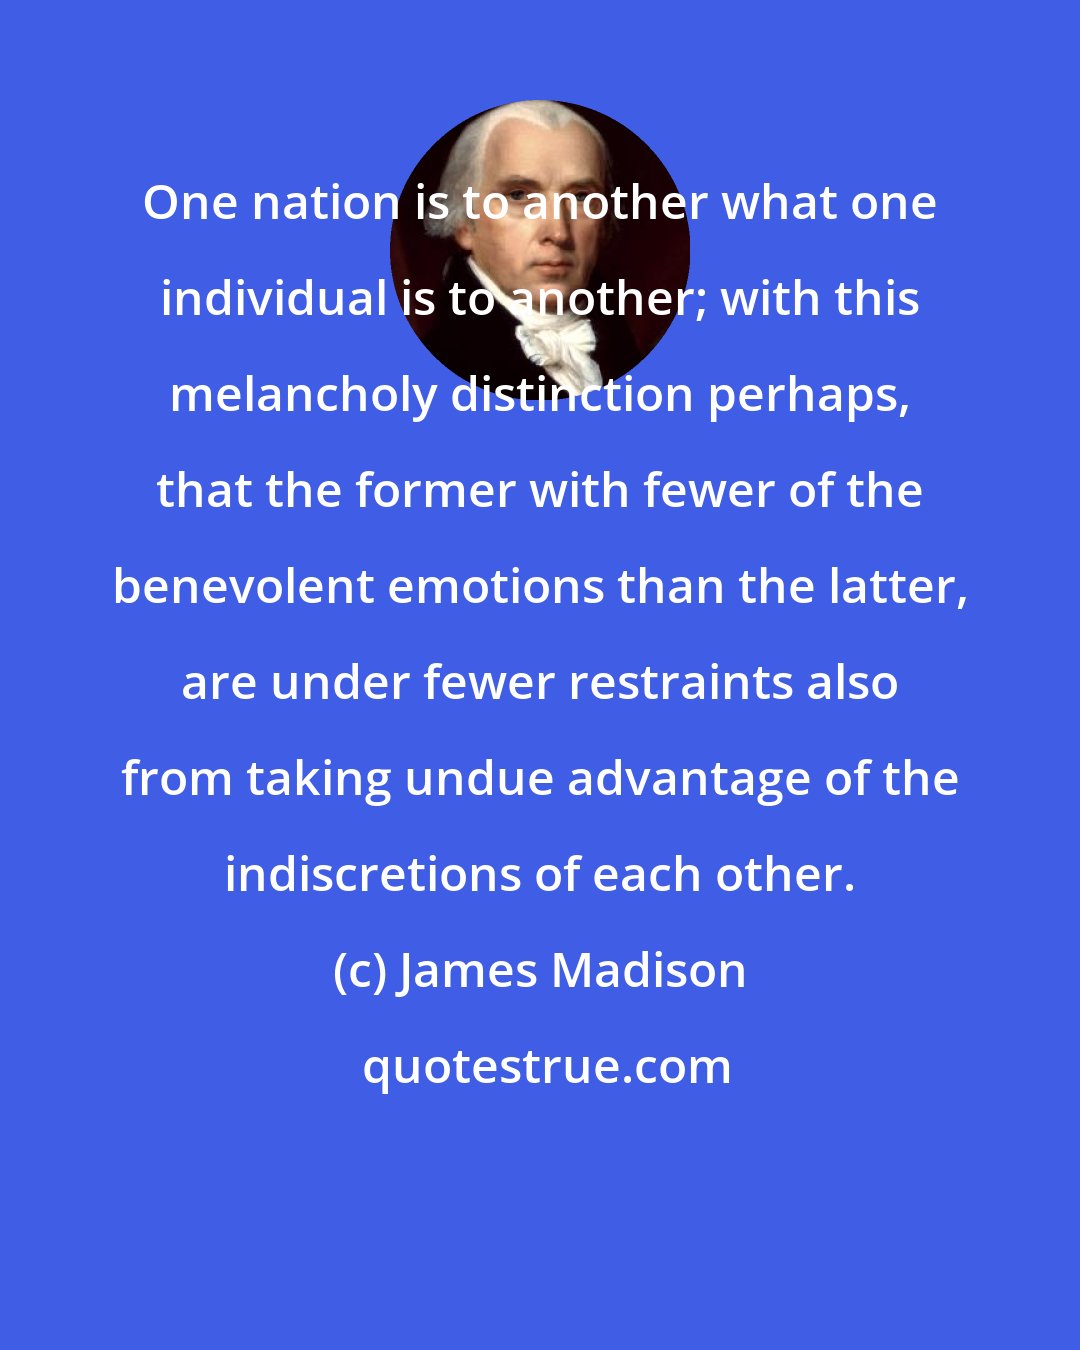 James Madison: One nation is to another what one individual is to another; with this melancholy distinction perhaps, that the former with fewer of the benevolent emotions than the latter, are under fewer restraints also from taking undue advantage of the indiscretions of each other.